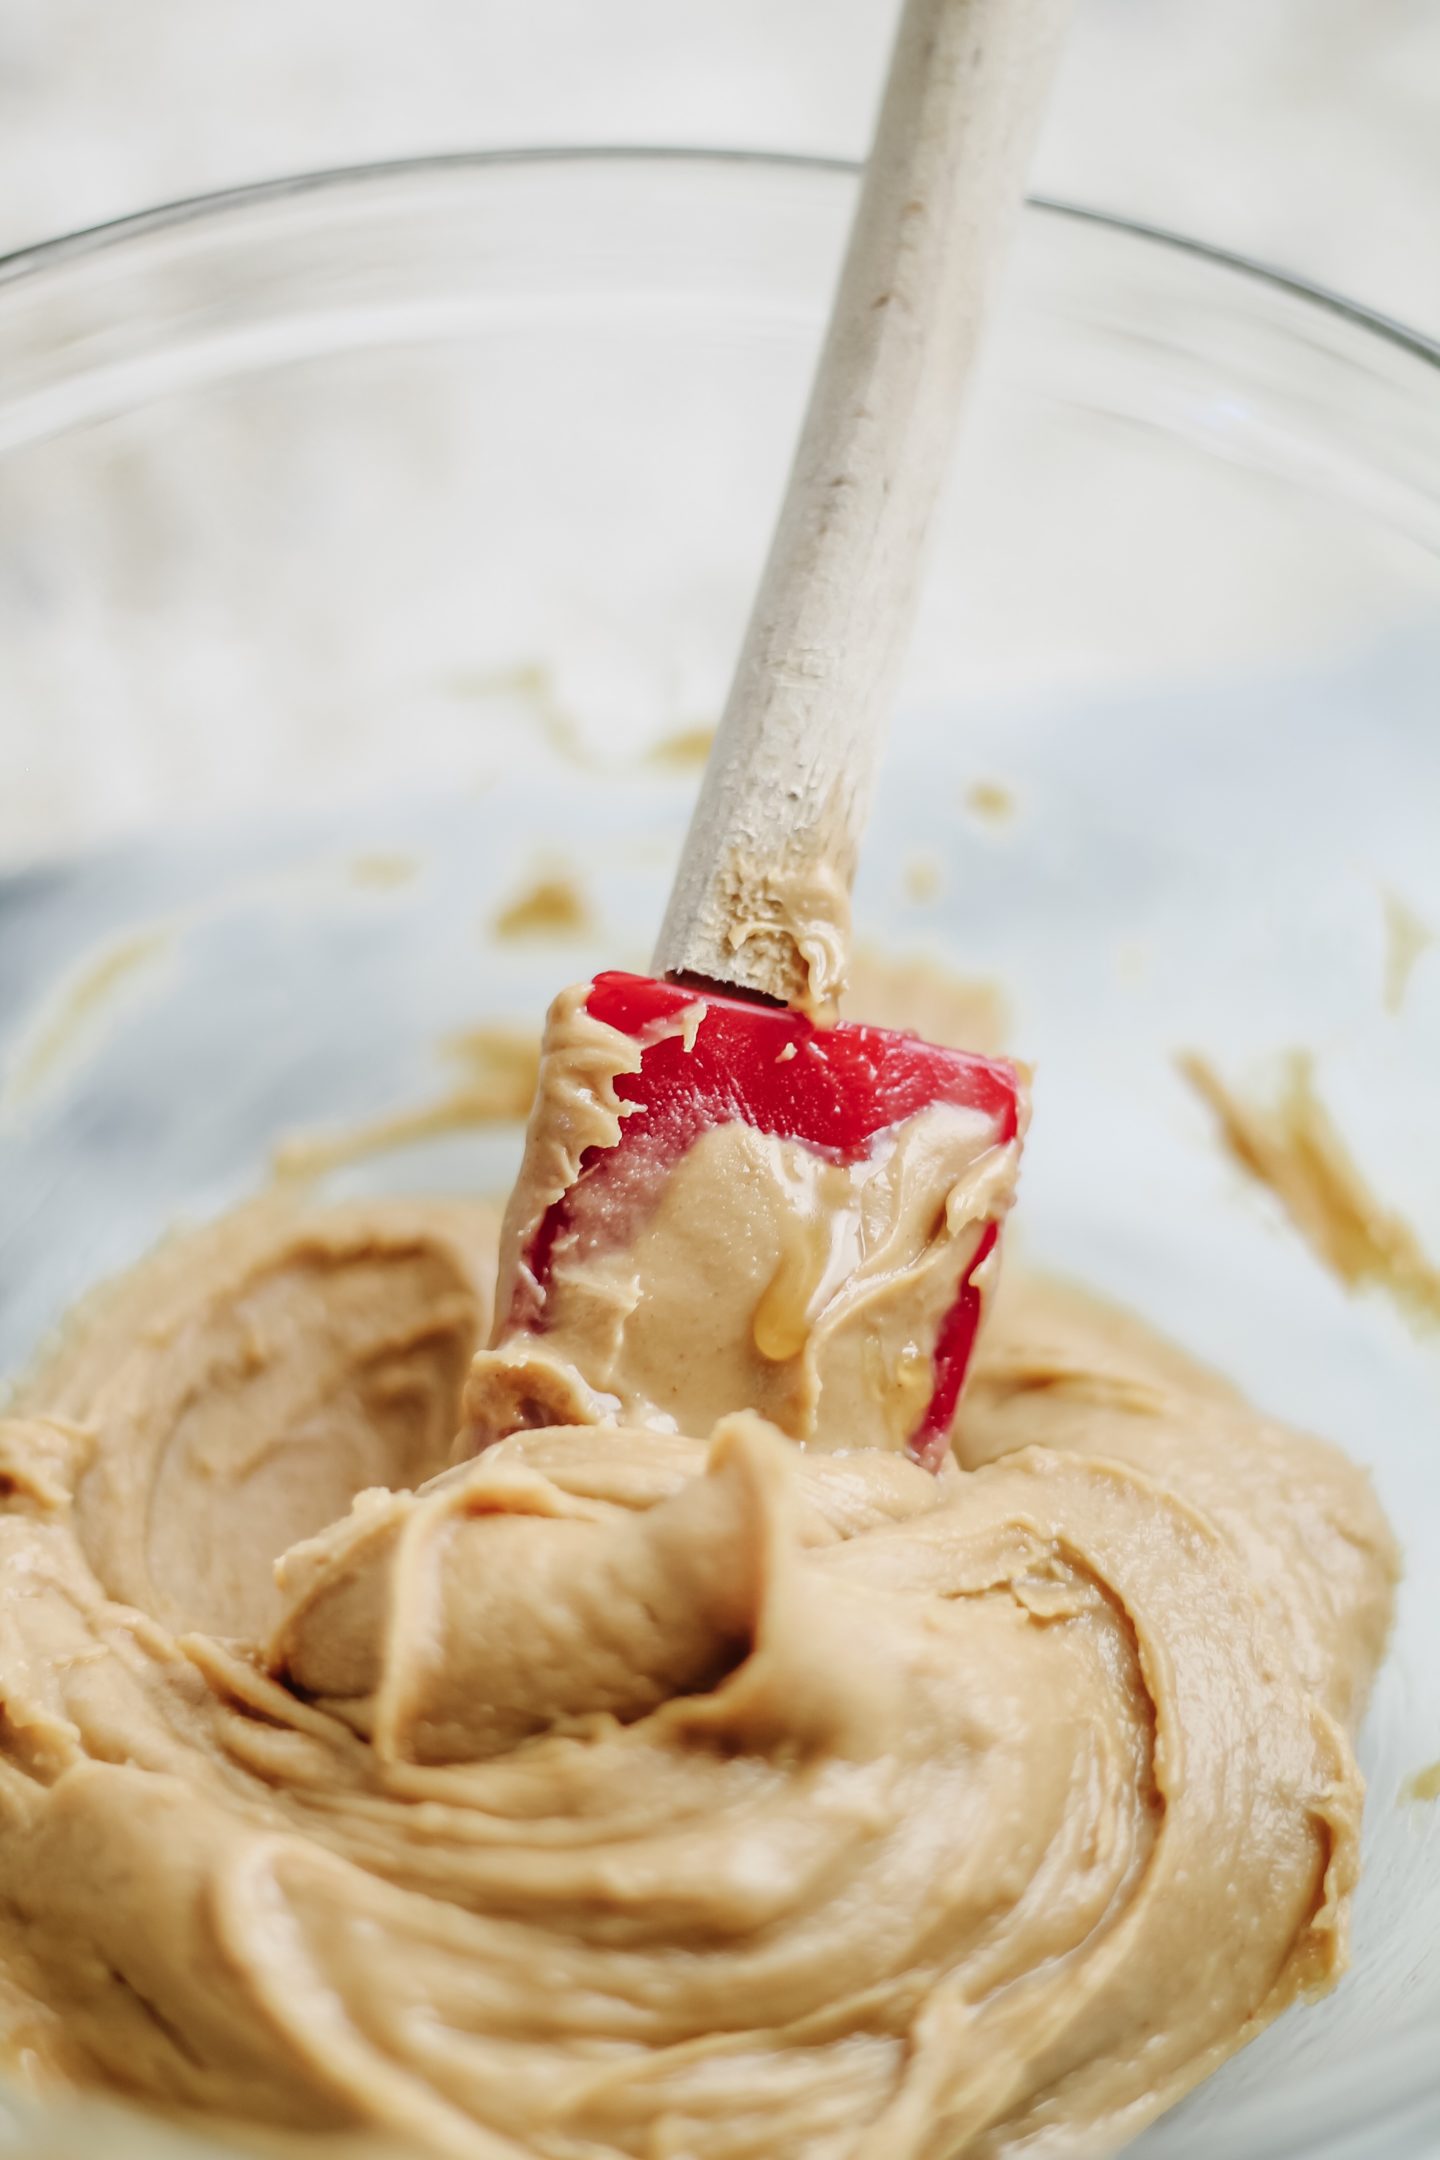 Best no-bake, honey peanut butter after school snacks! These are delicious!